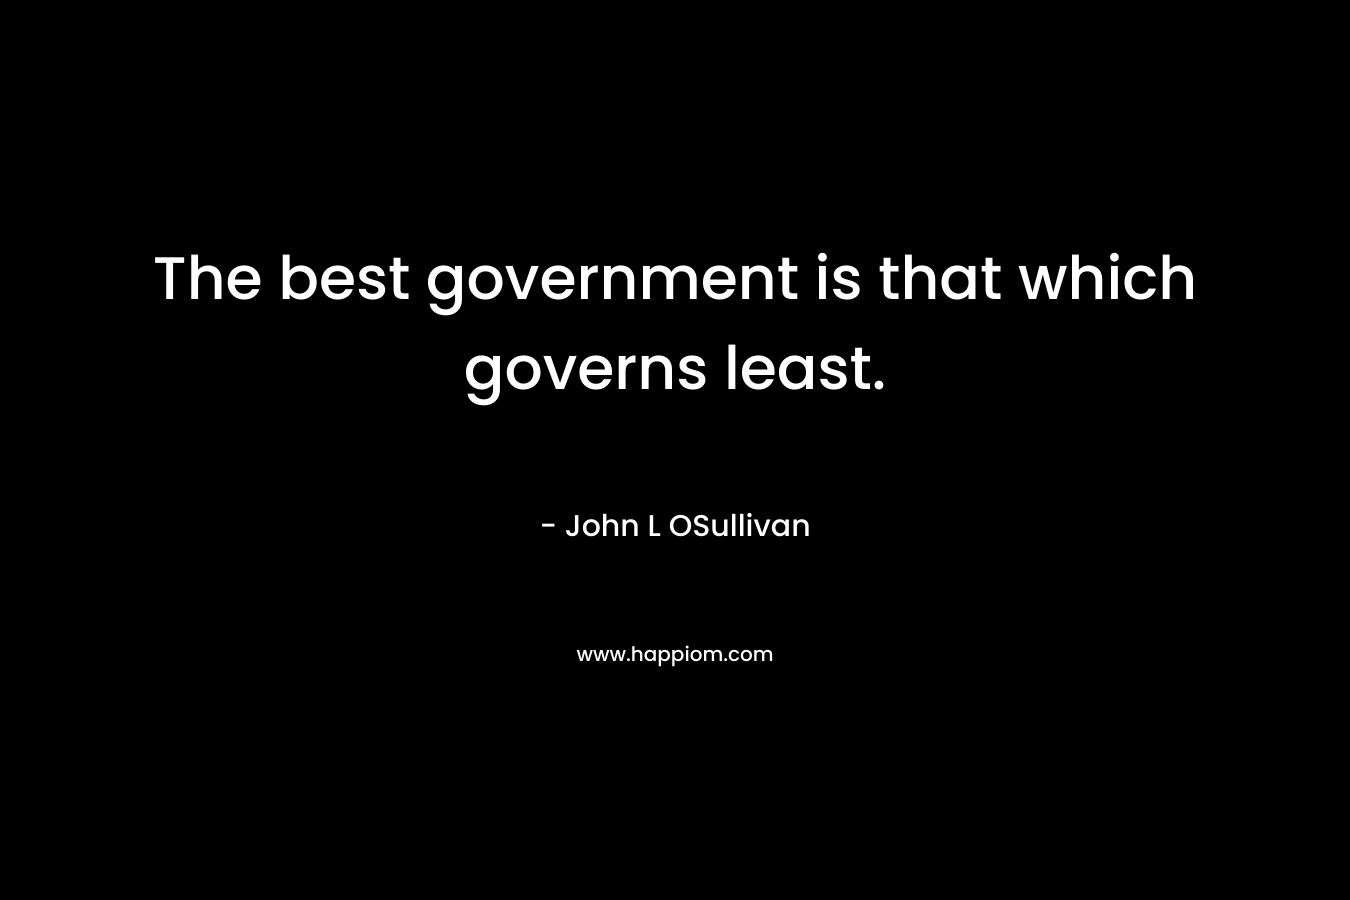 The best government is that which governs least.